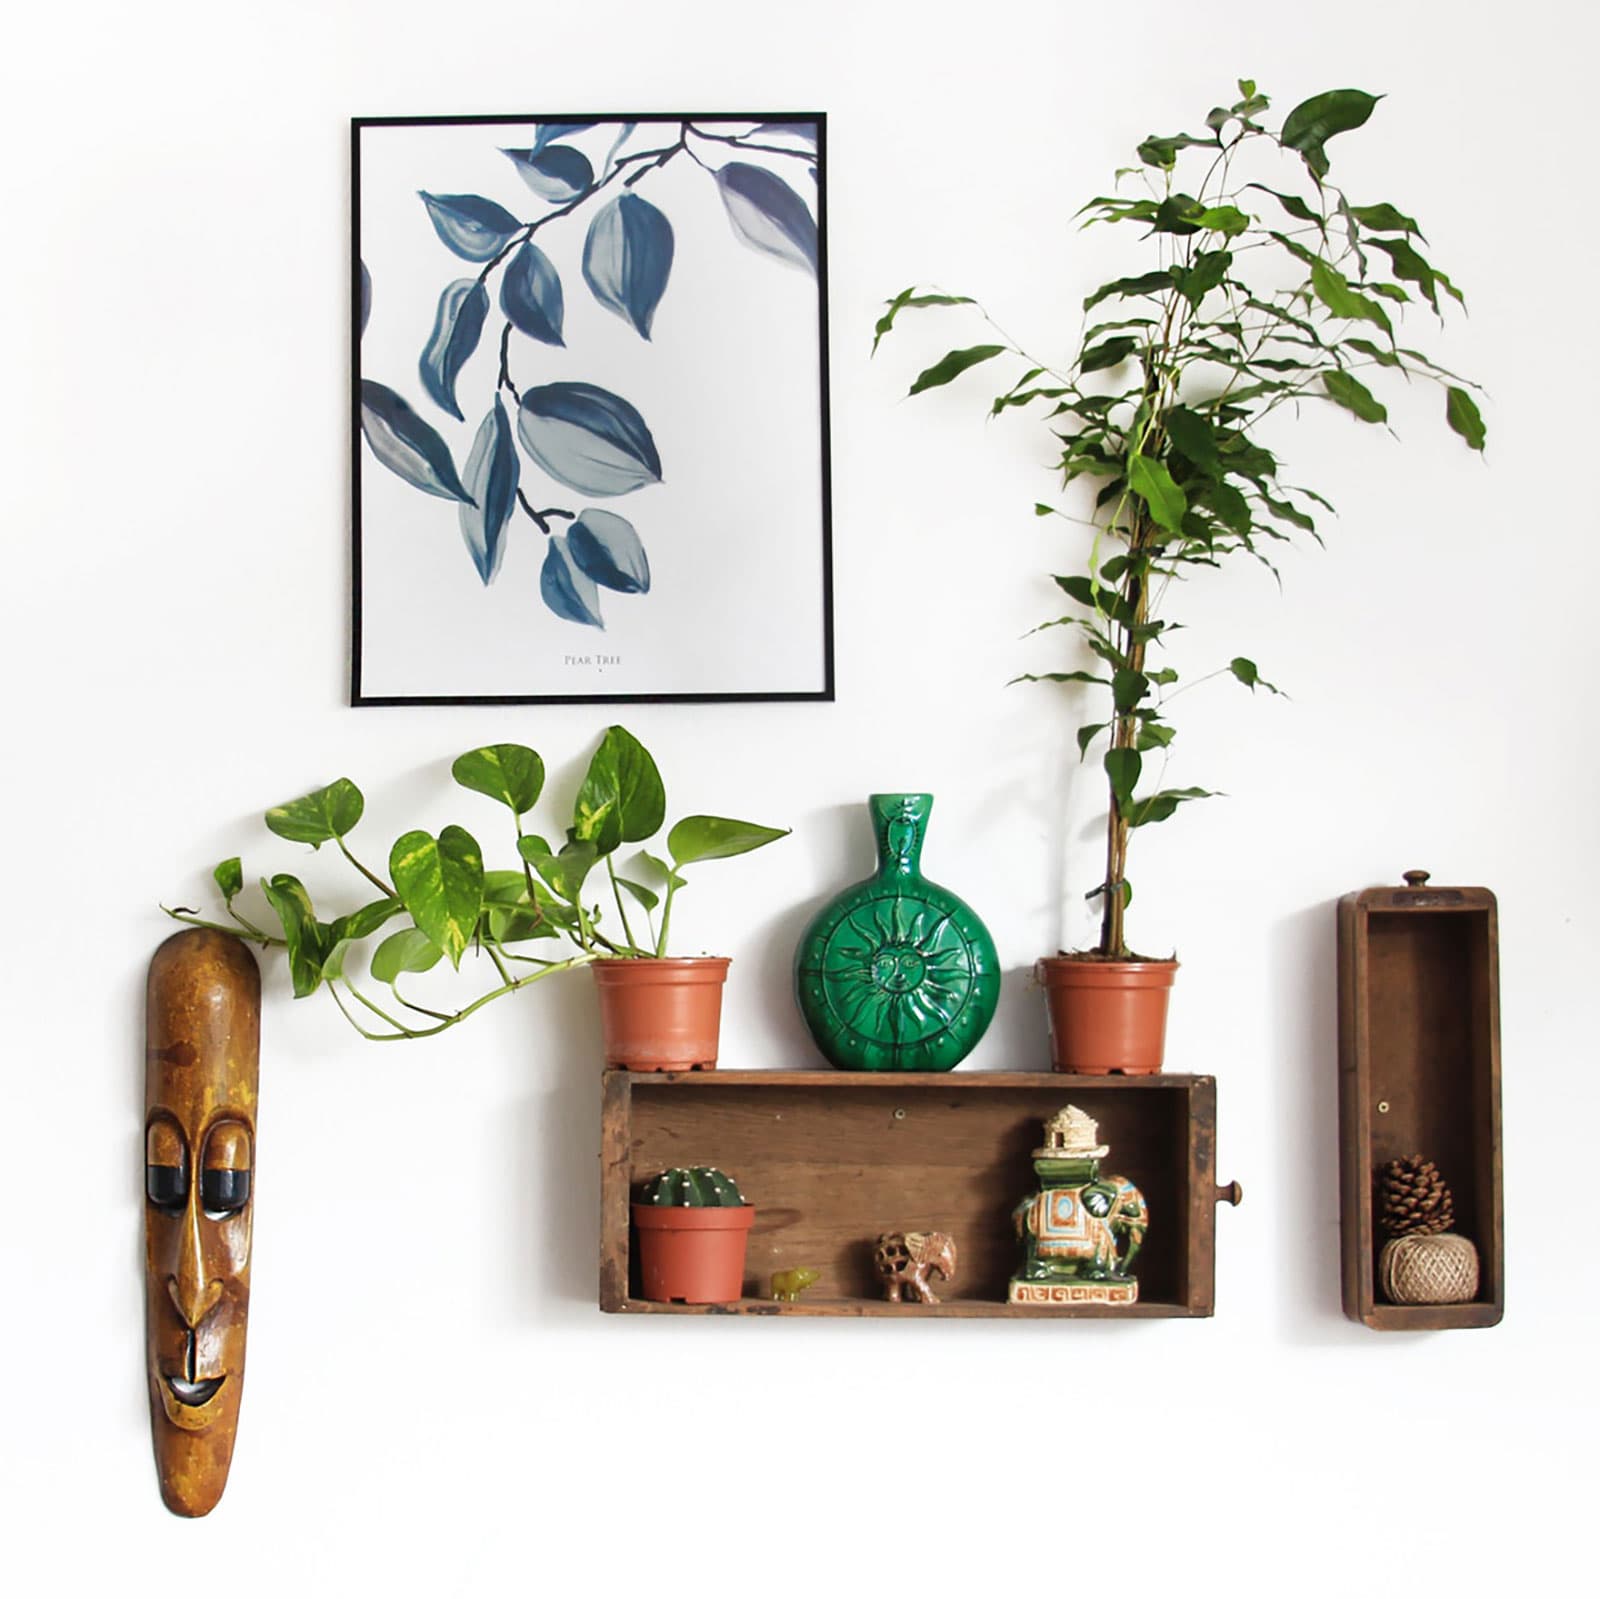  collection of handmade objects on the wall